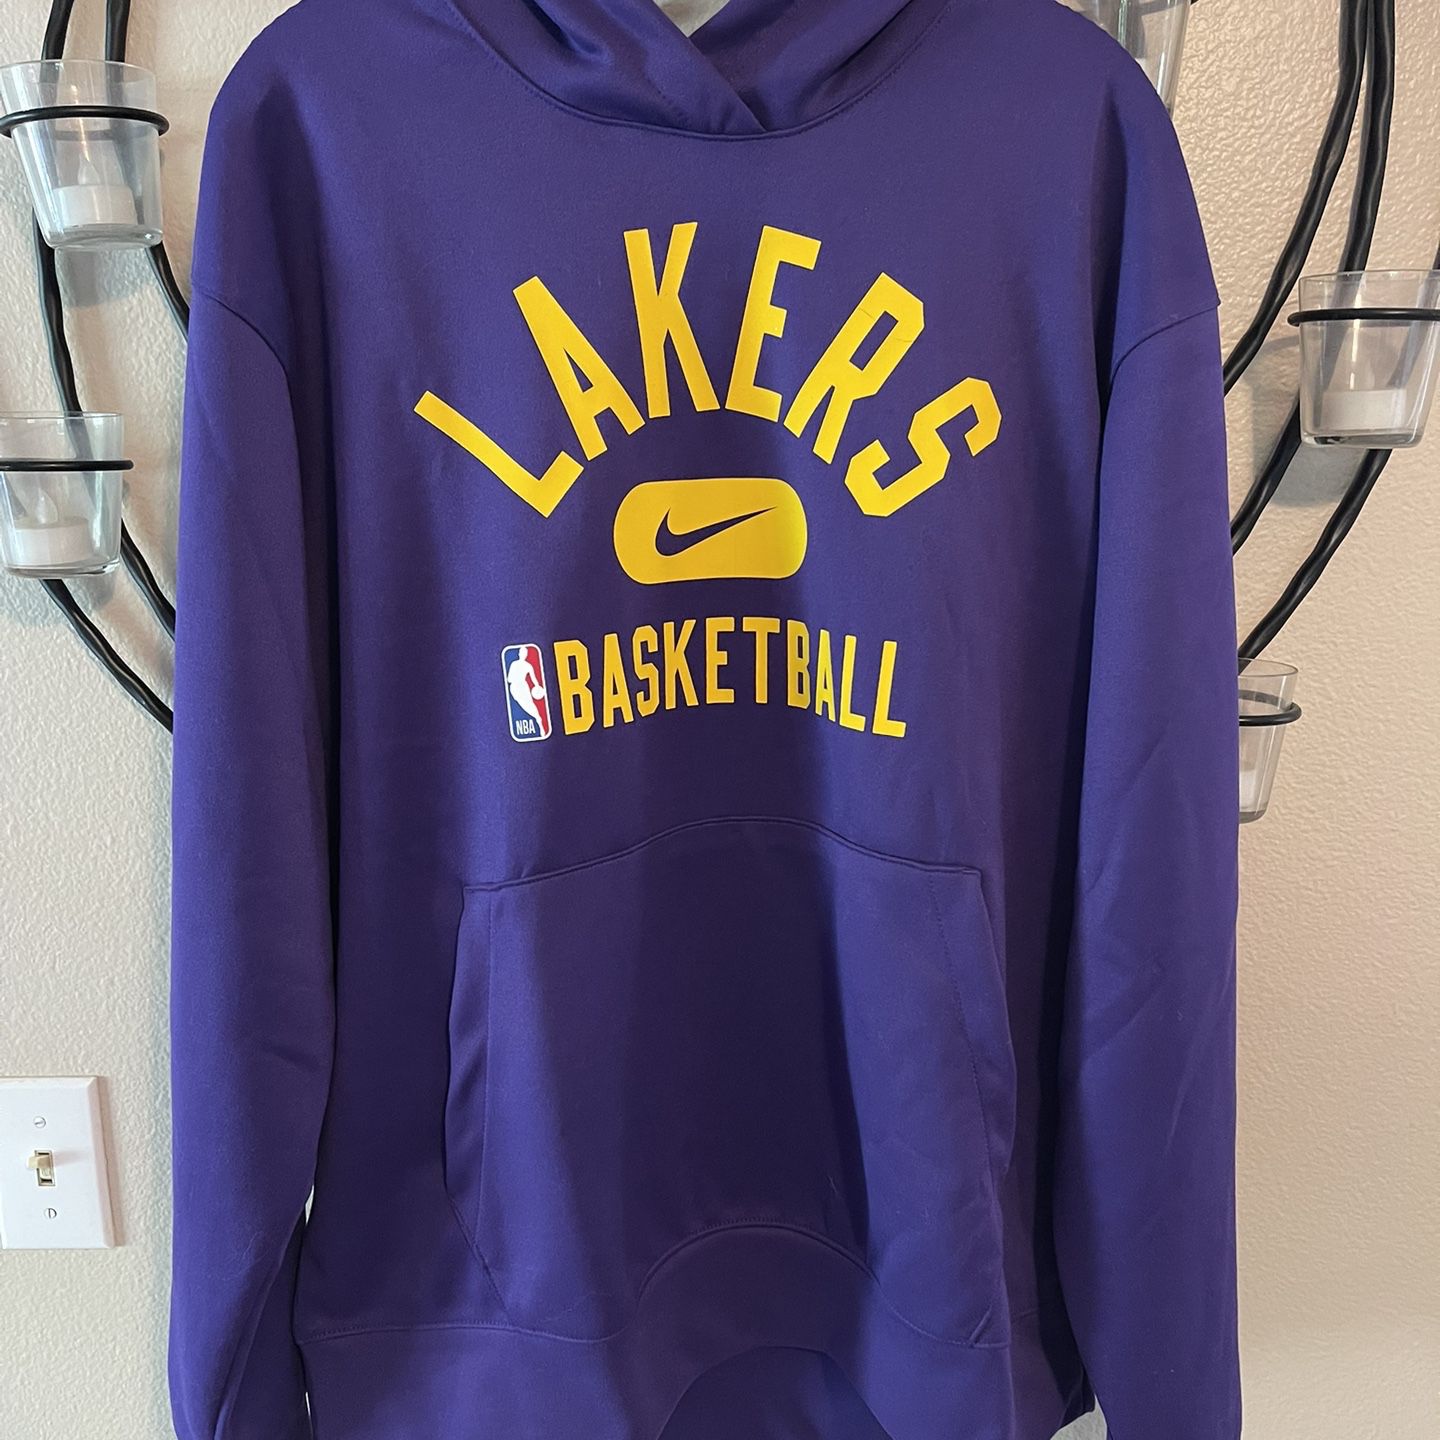 Lakers Nike Sweatshirt Size Large - New Without Tags for Sale in